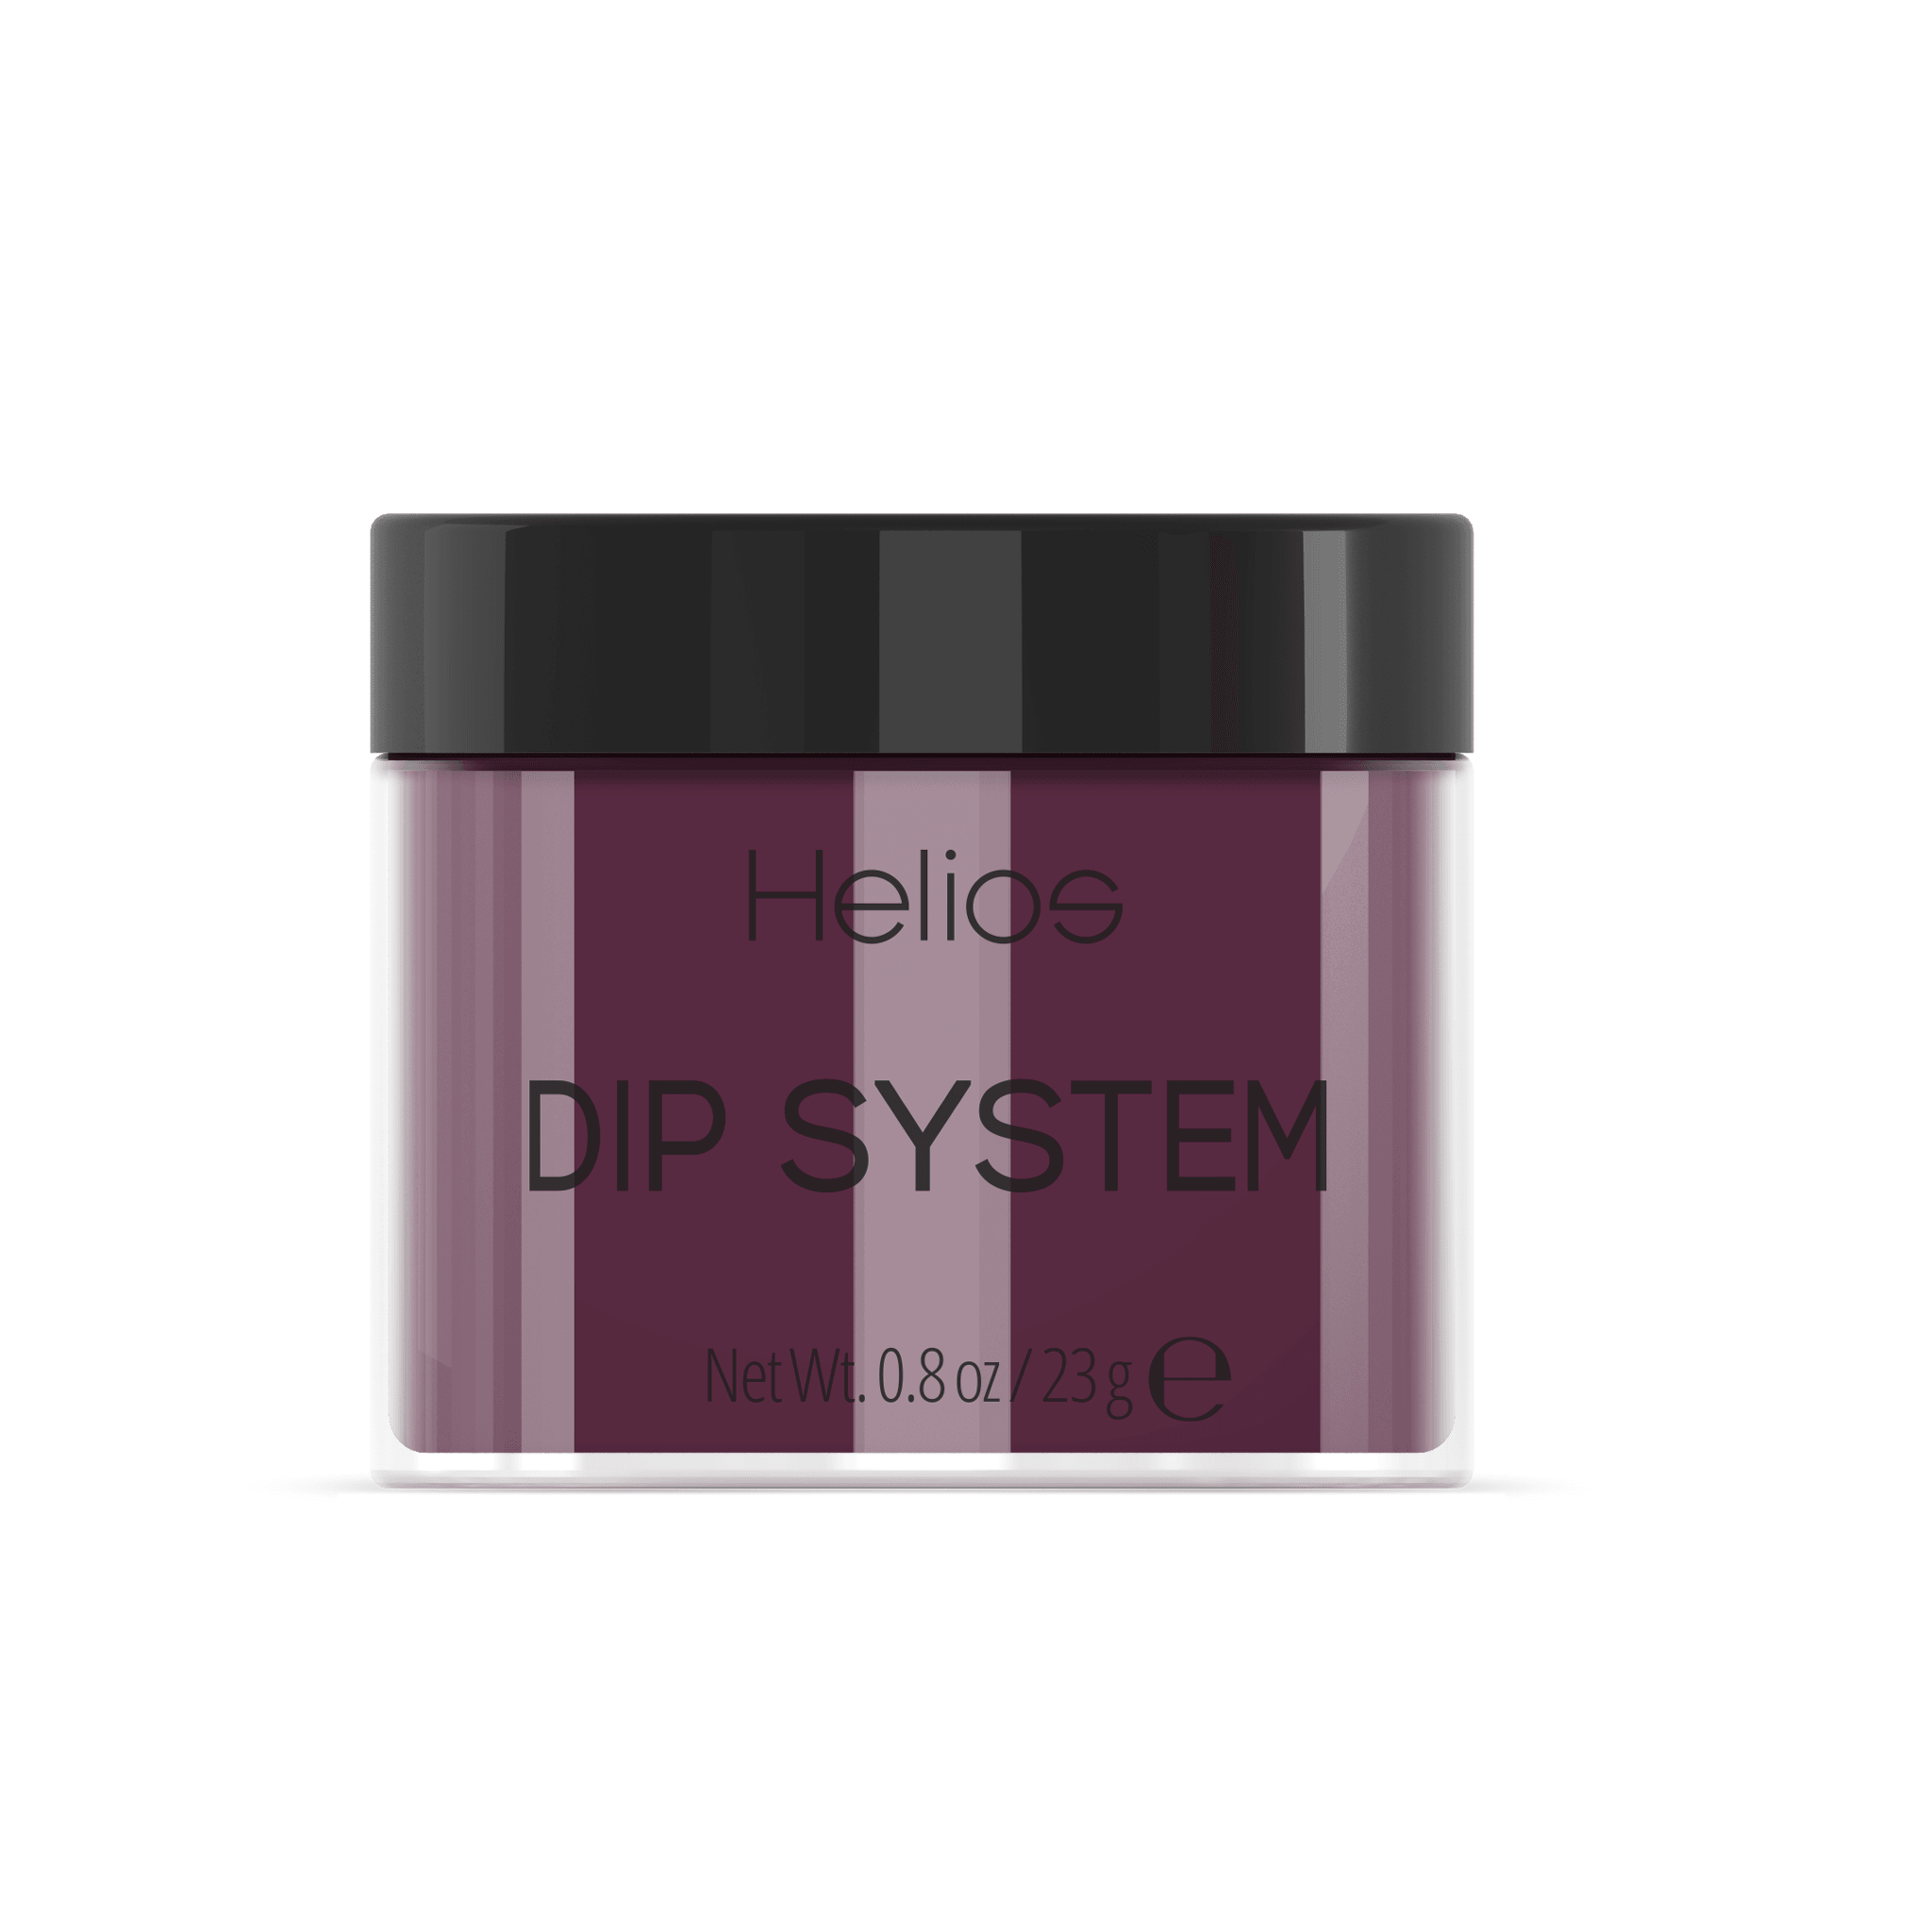 DIP SYSTEM - WITTY BEHAVIOR - Helios Nail Systems